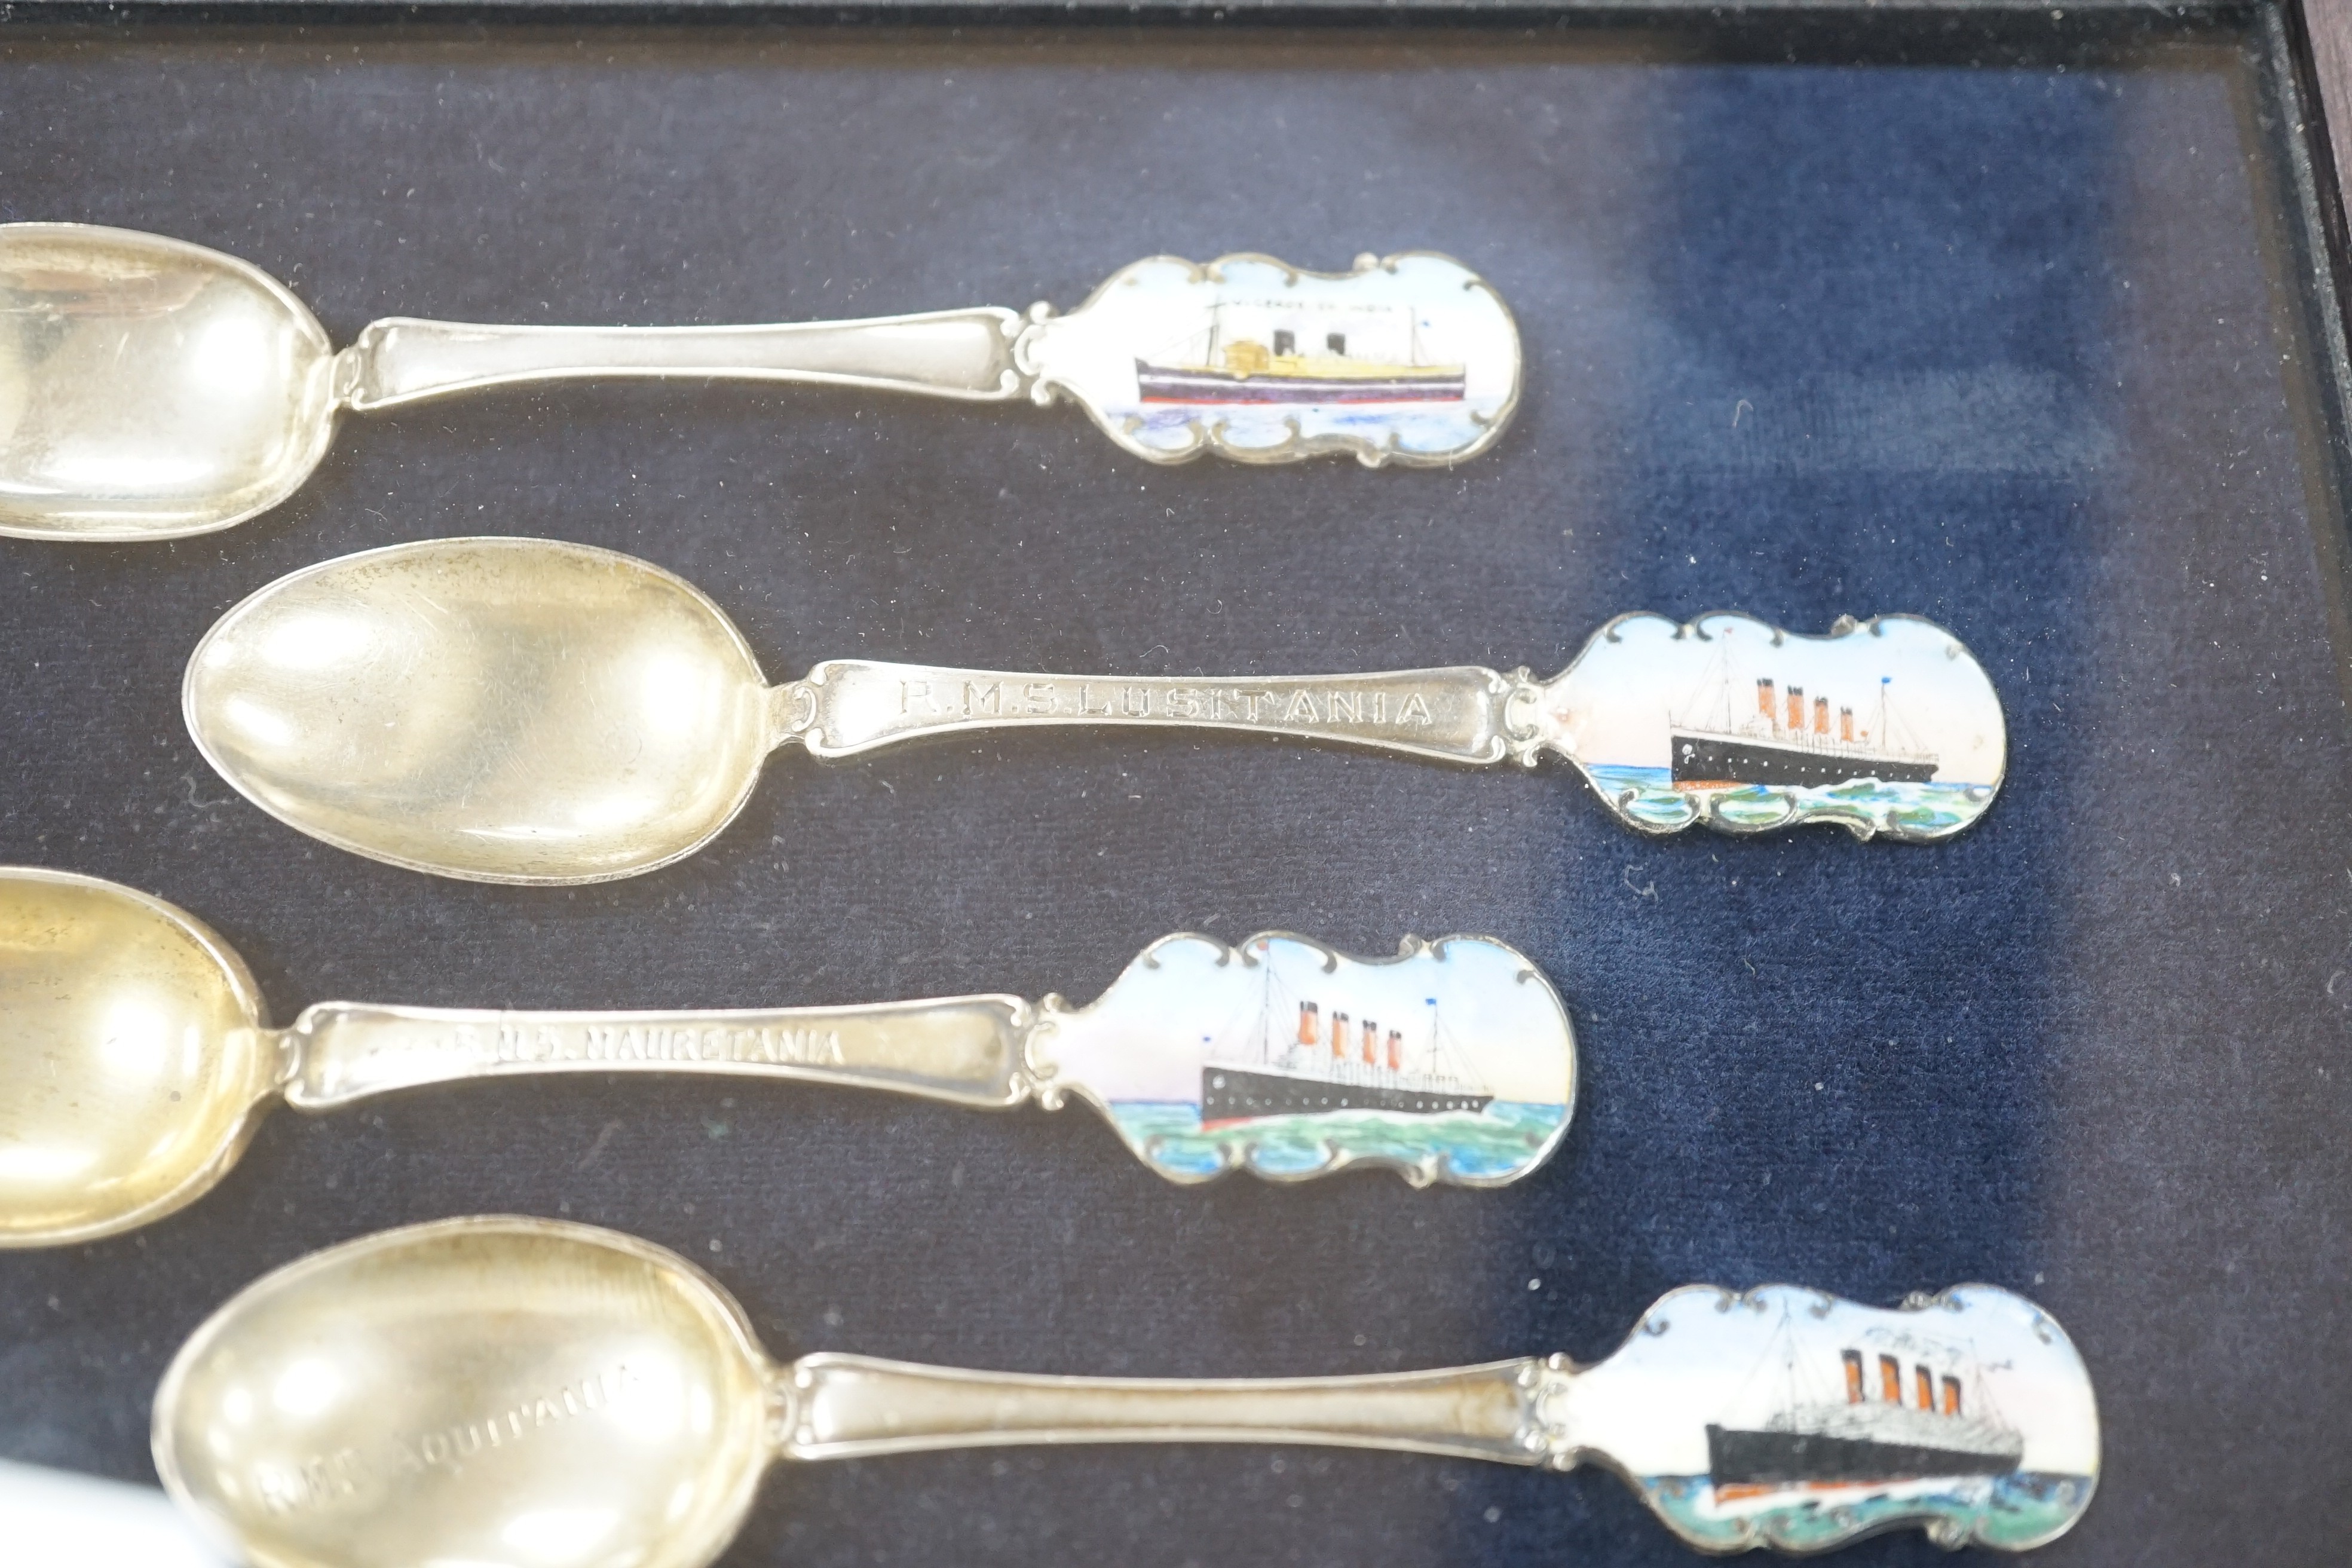 Cunard and P&O liners interest - four early 20th century silver and enamel souvenir spoons, inscribed RMS Lusitania, RMS Aquitania, RMS Mauretania and Viceroy of India, cased